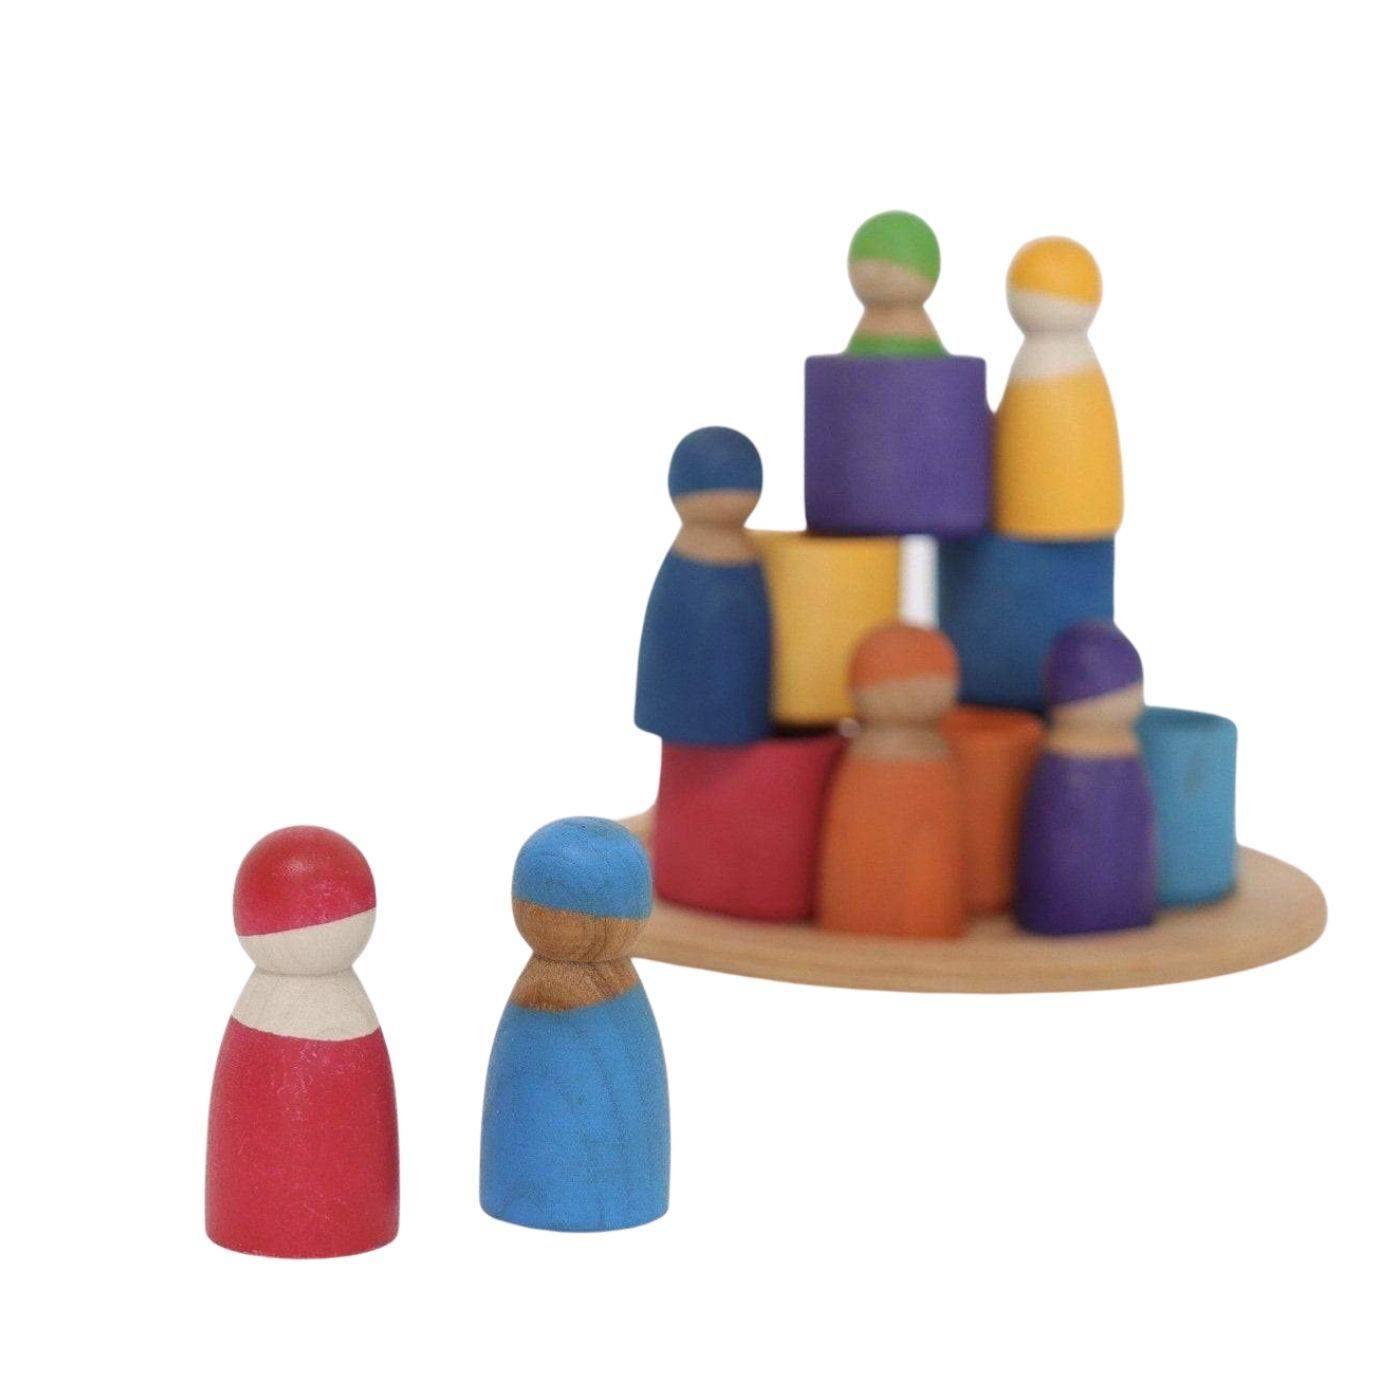 7 Rainbow Wooden Peg Dolls in Bowls - Why and Whale